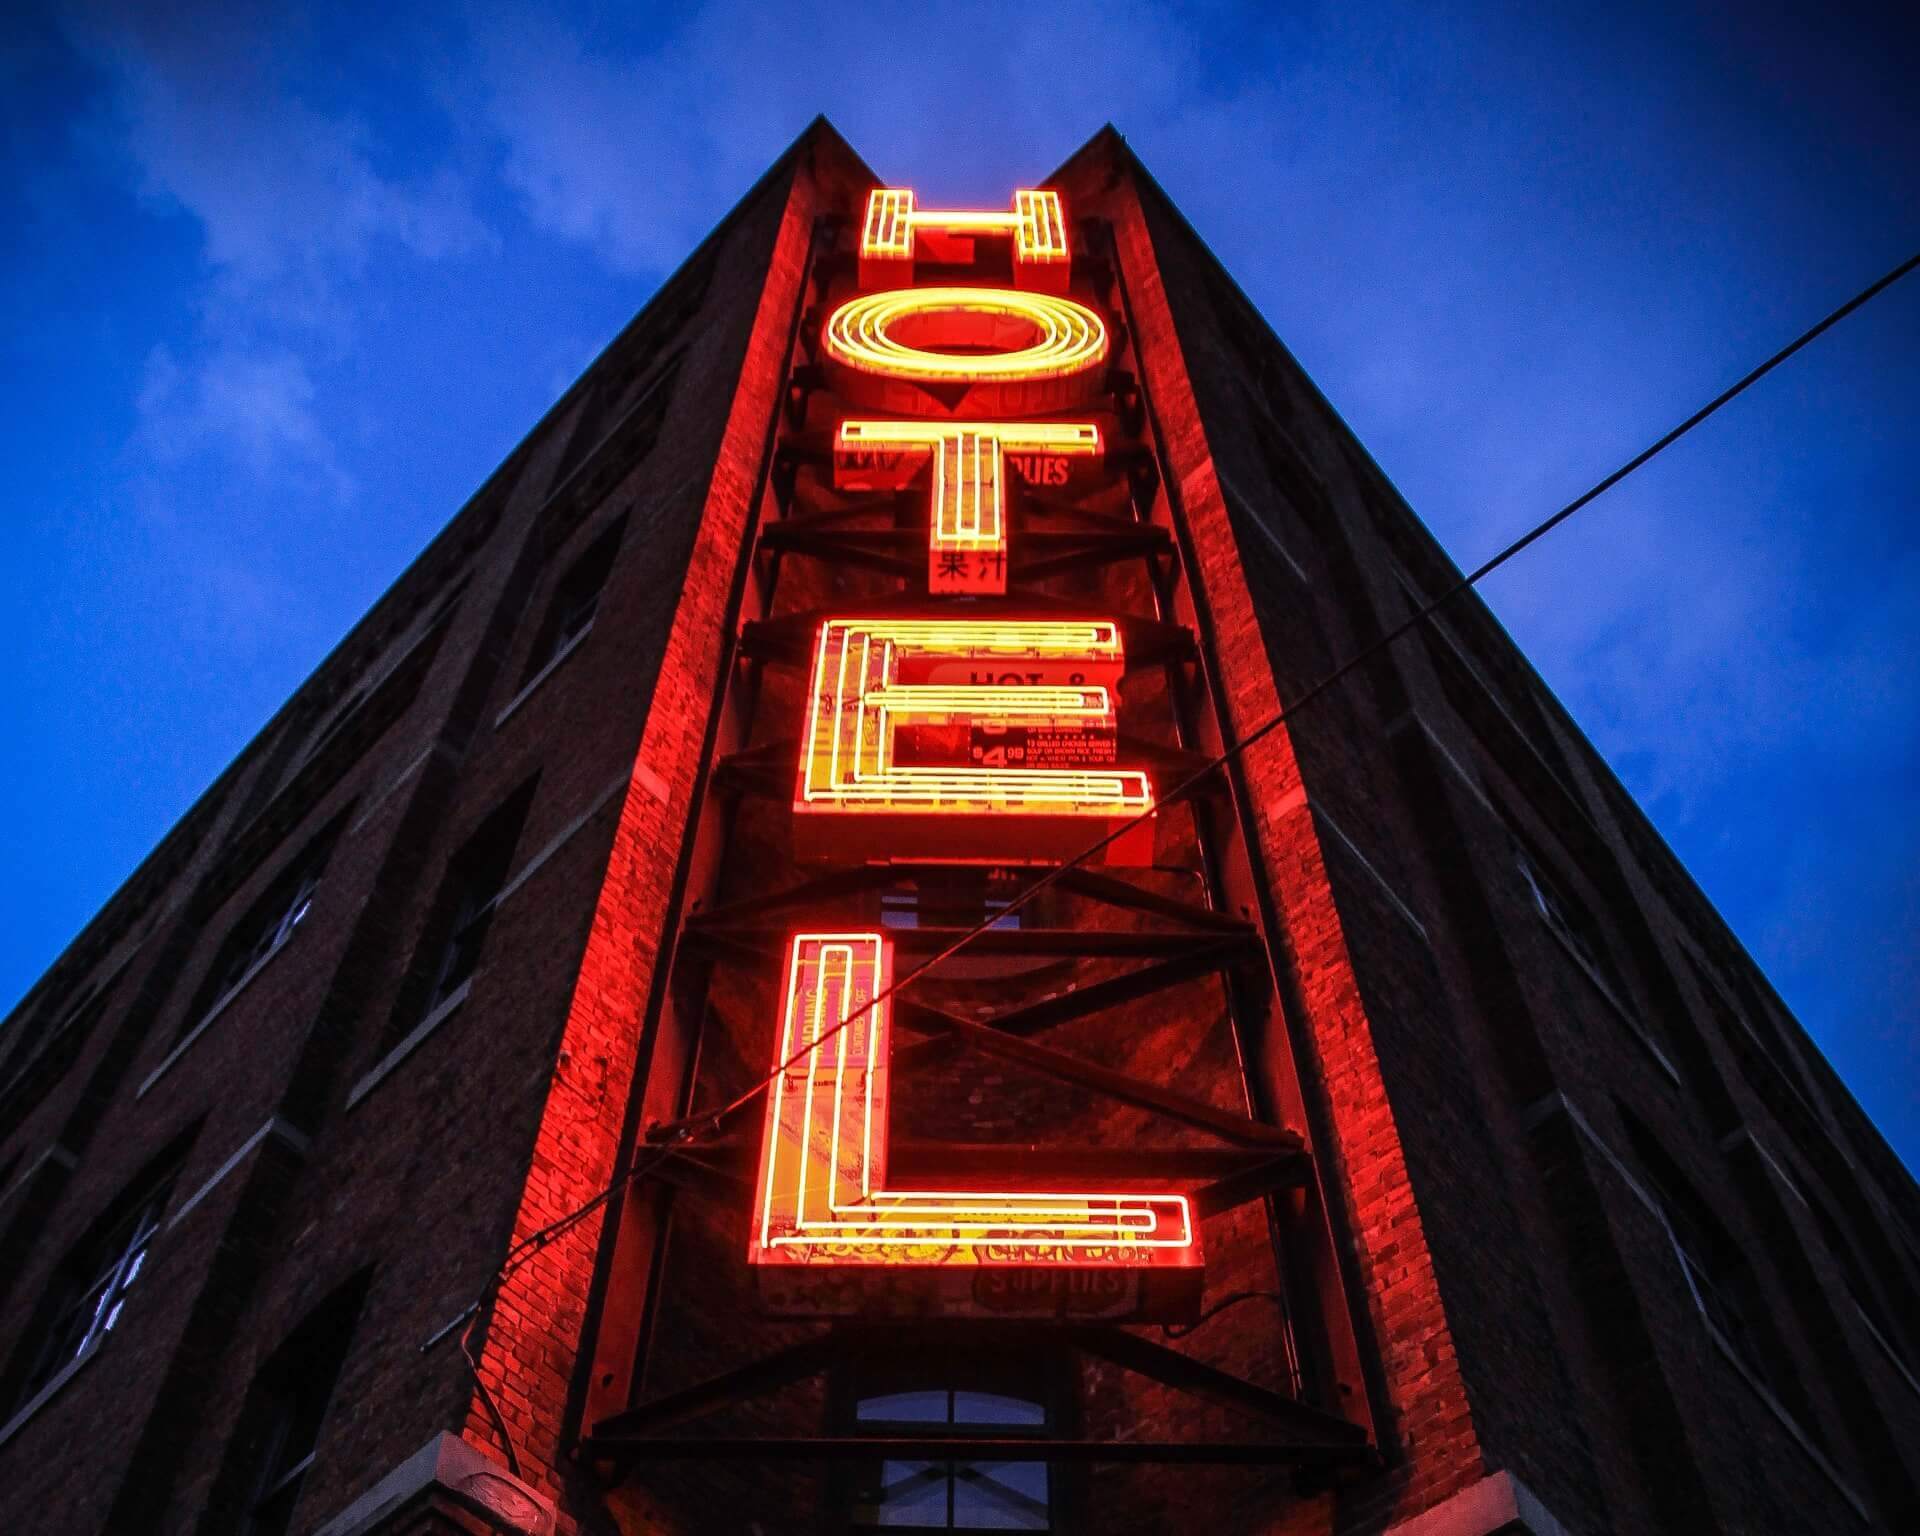 Perspective shot of neon hotel sign